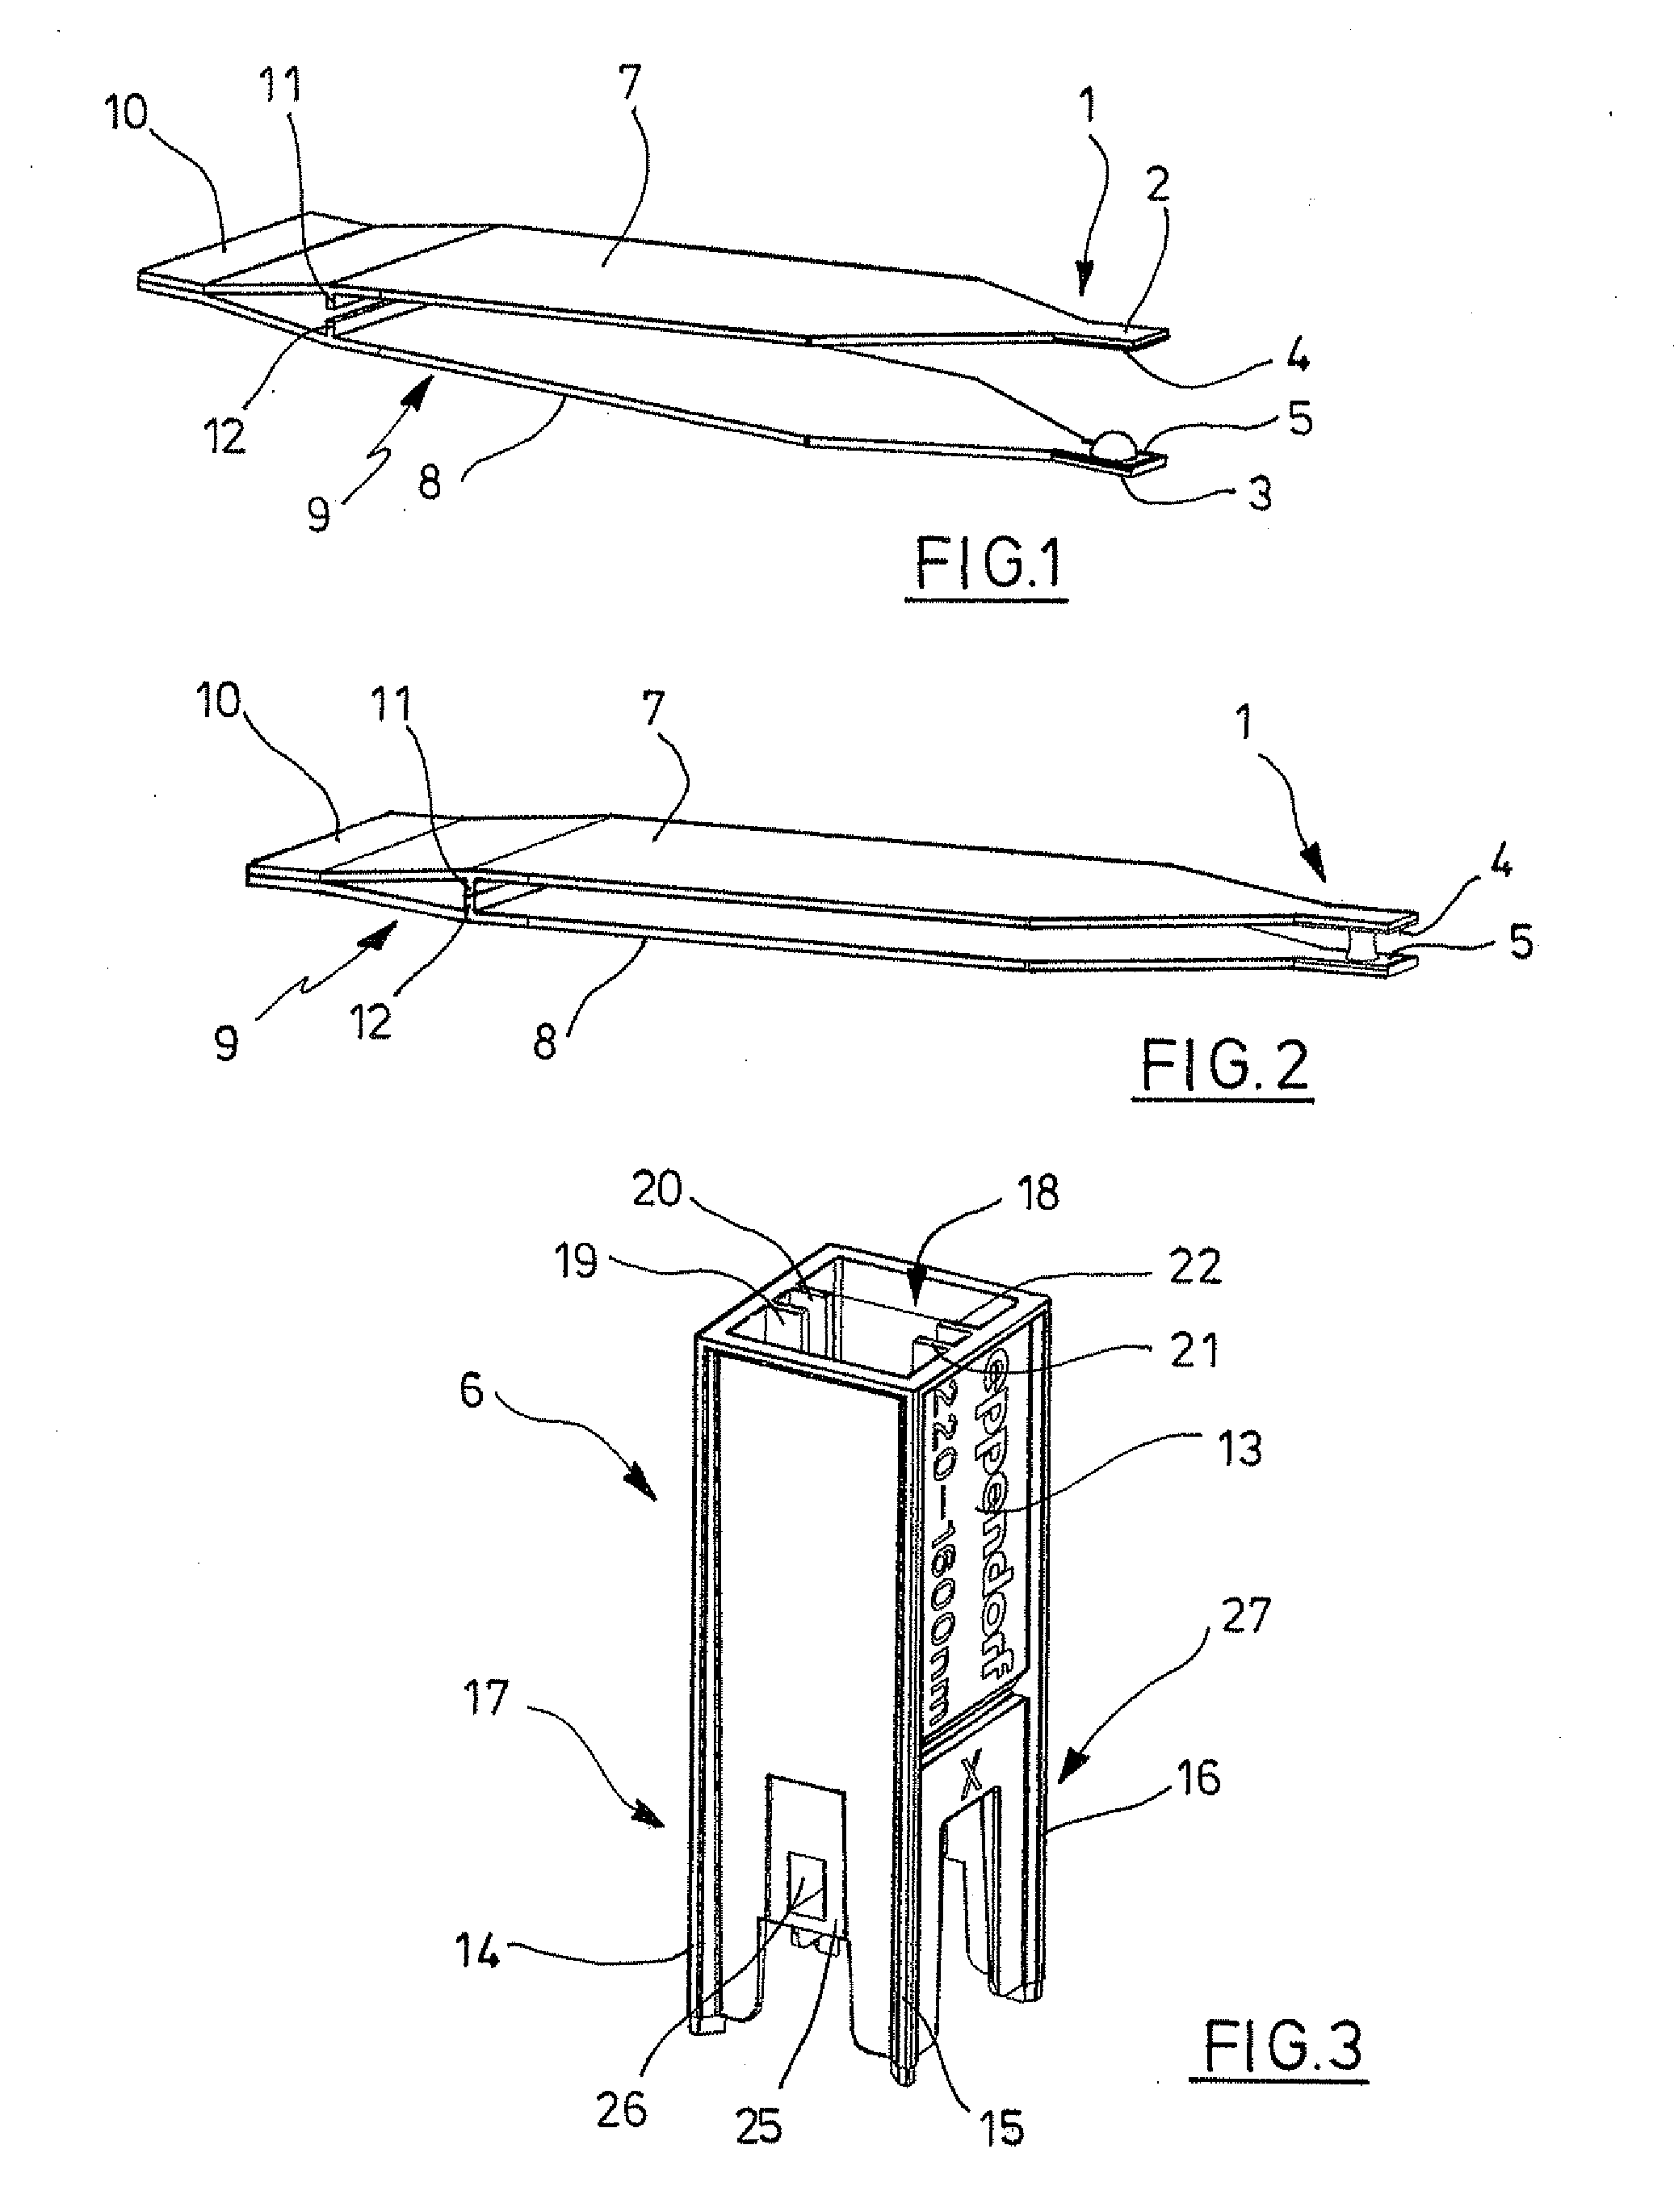 Cuvette, Insert, Adapter and Method for Optically Examining Small Amounts of Liquid